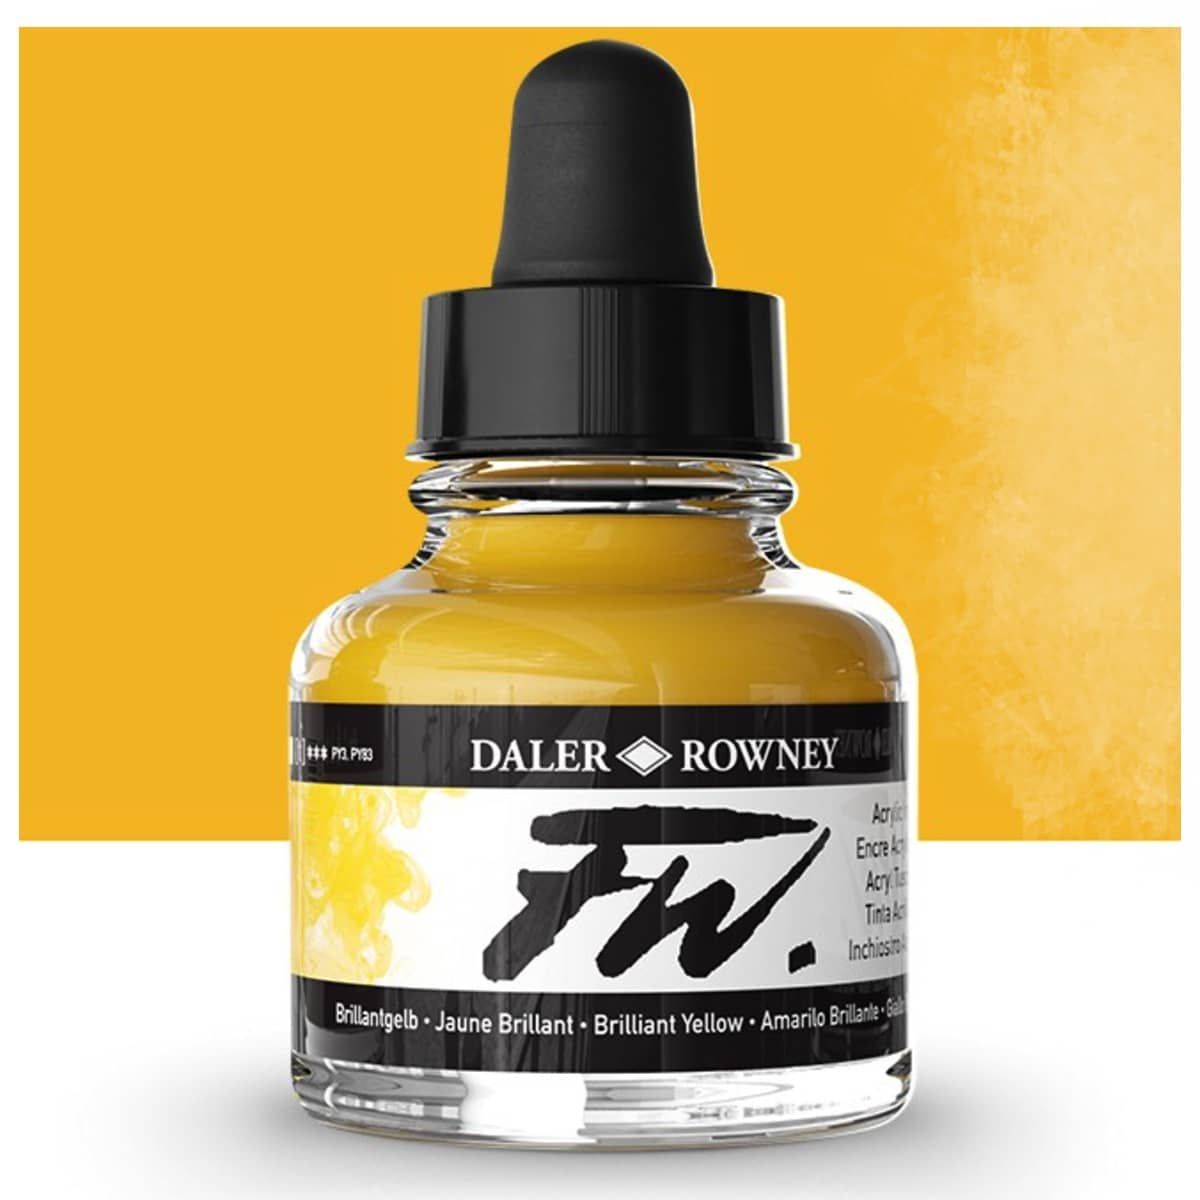 Daler-Rowney - Hooked on FW Acrylic #Ink? Just a tip